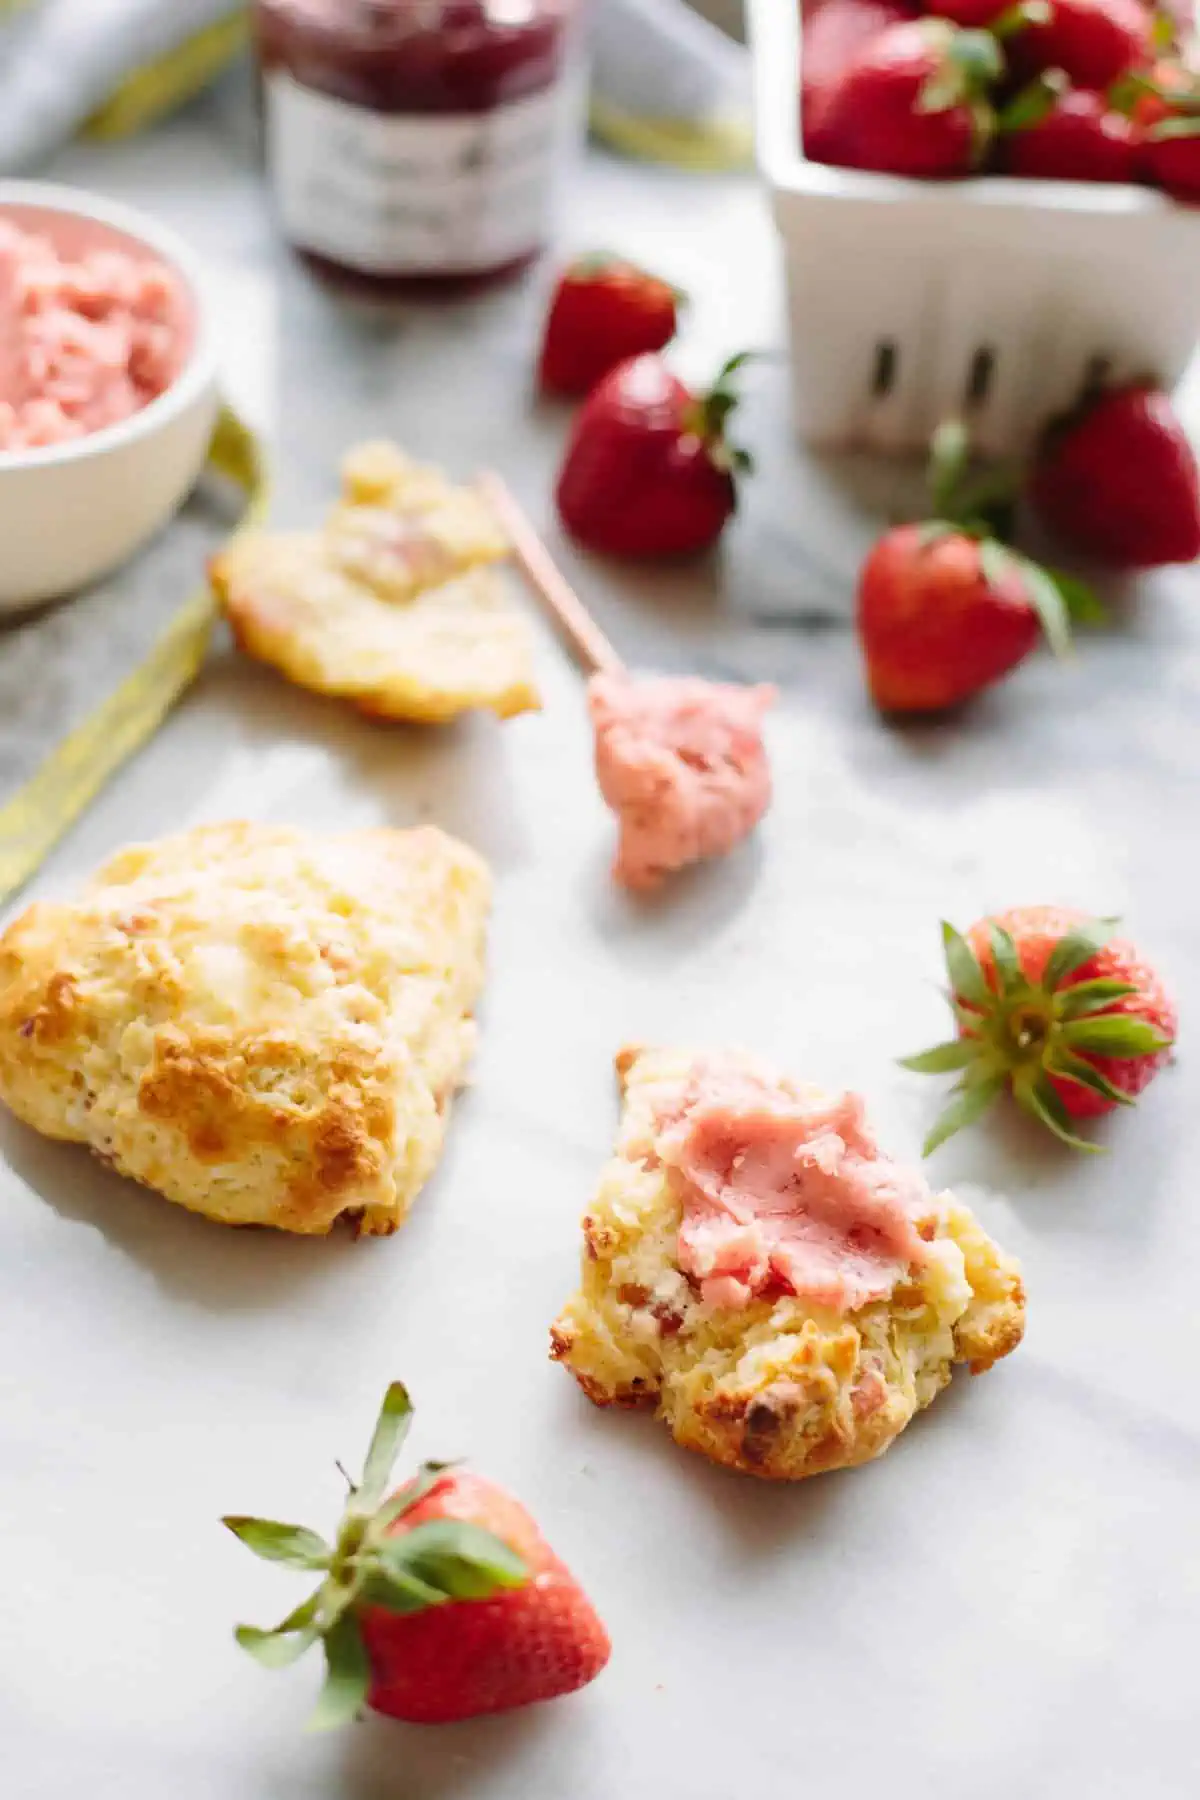 A split open scone spread with strawberry butter.